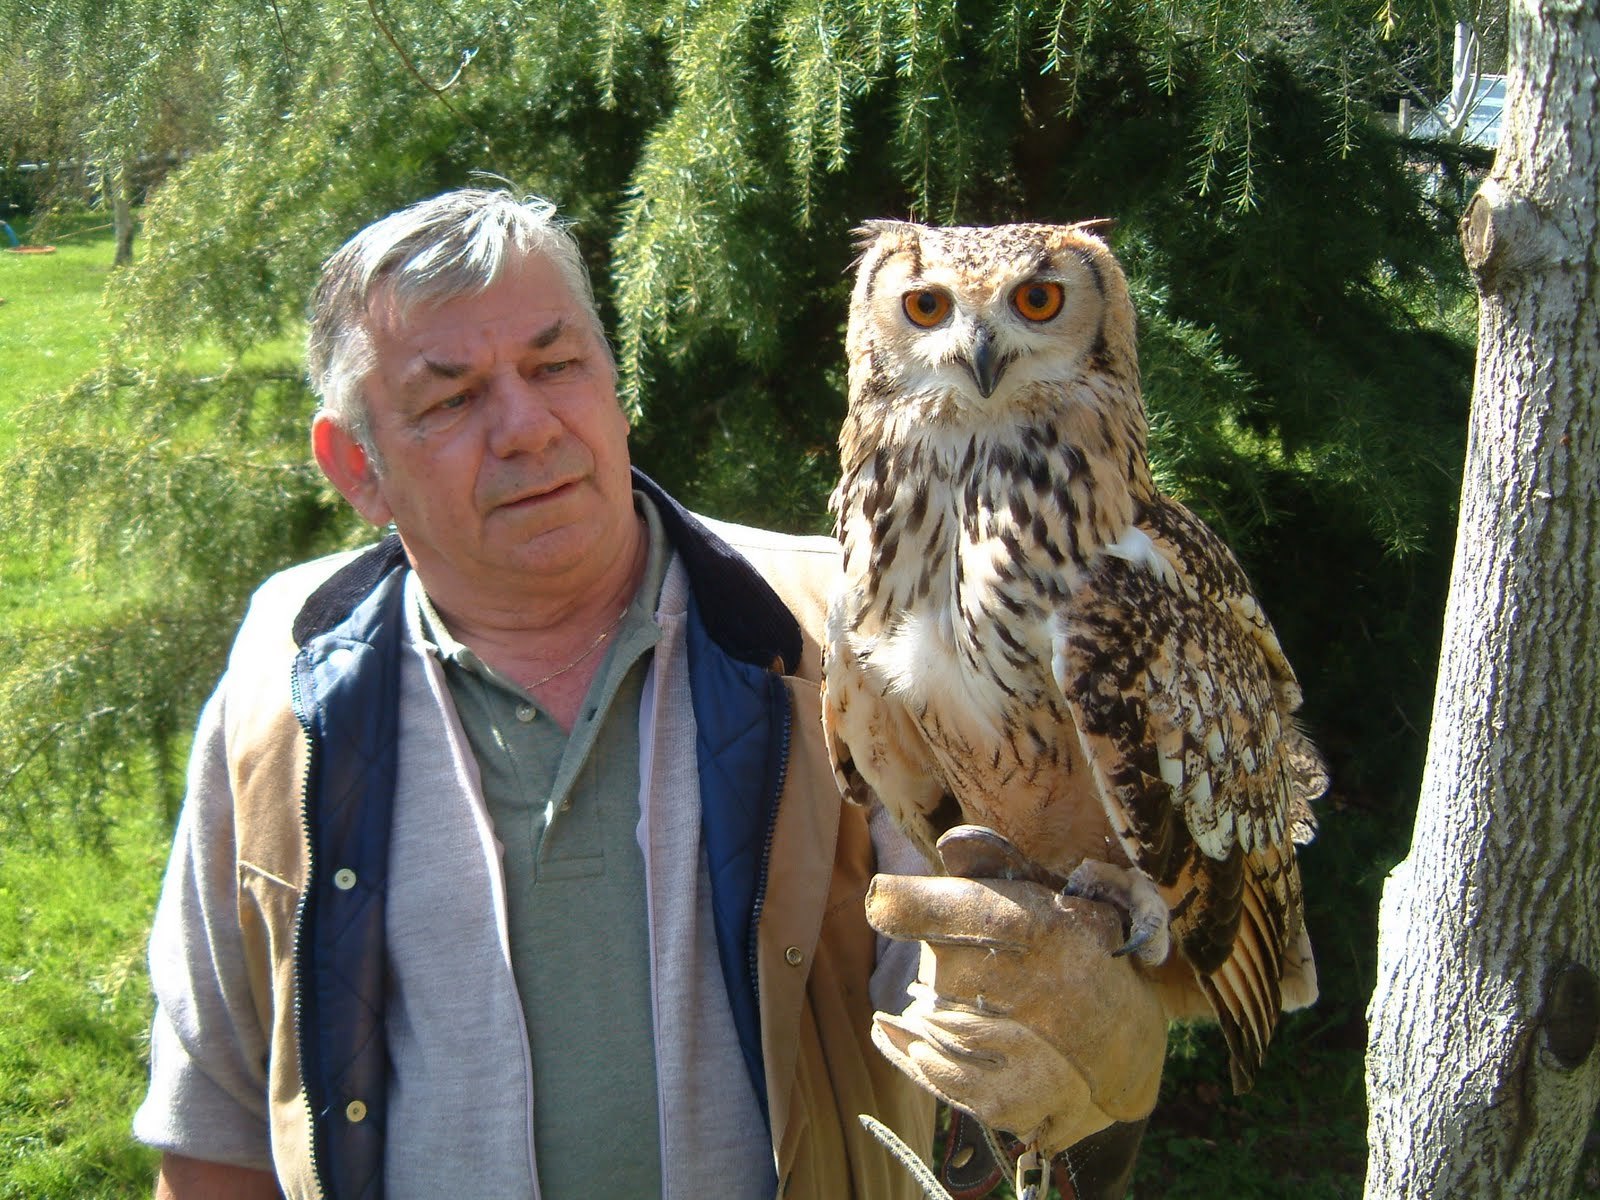 The Cumberland Bird of Prey Centre just outside Carlisle